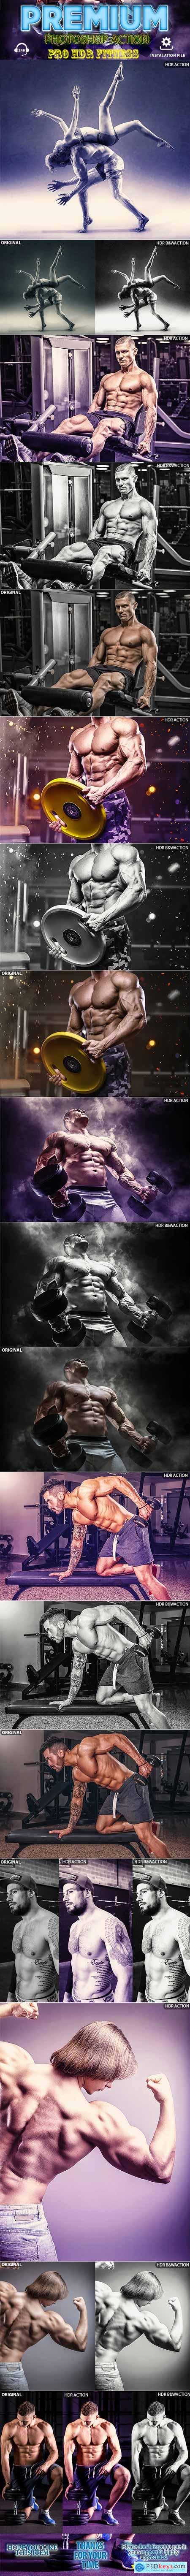 GraphicRiver Fitness HDR Photoshop Action